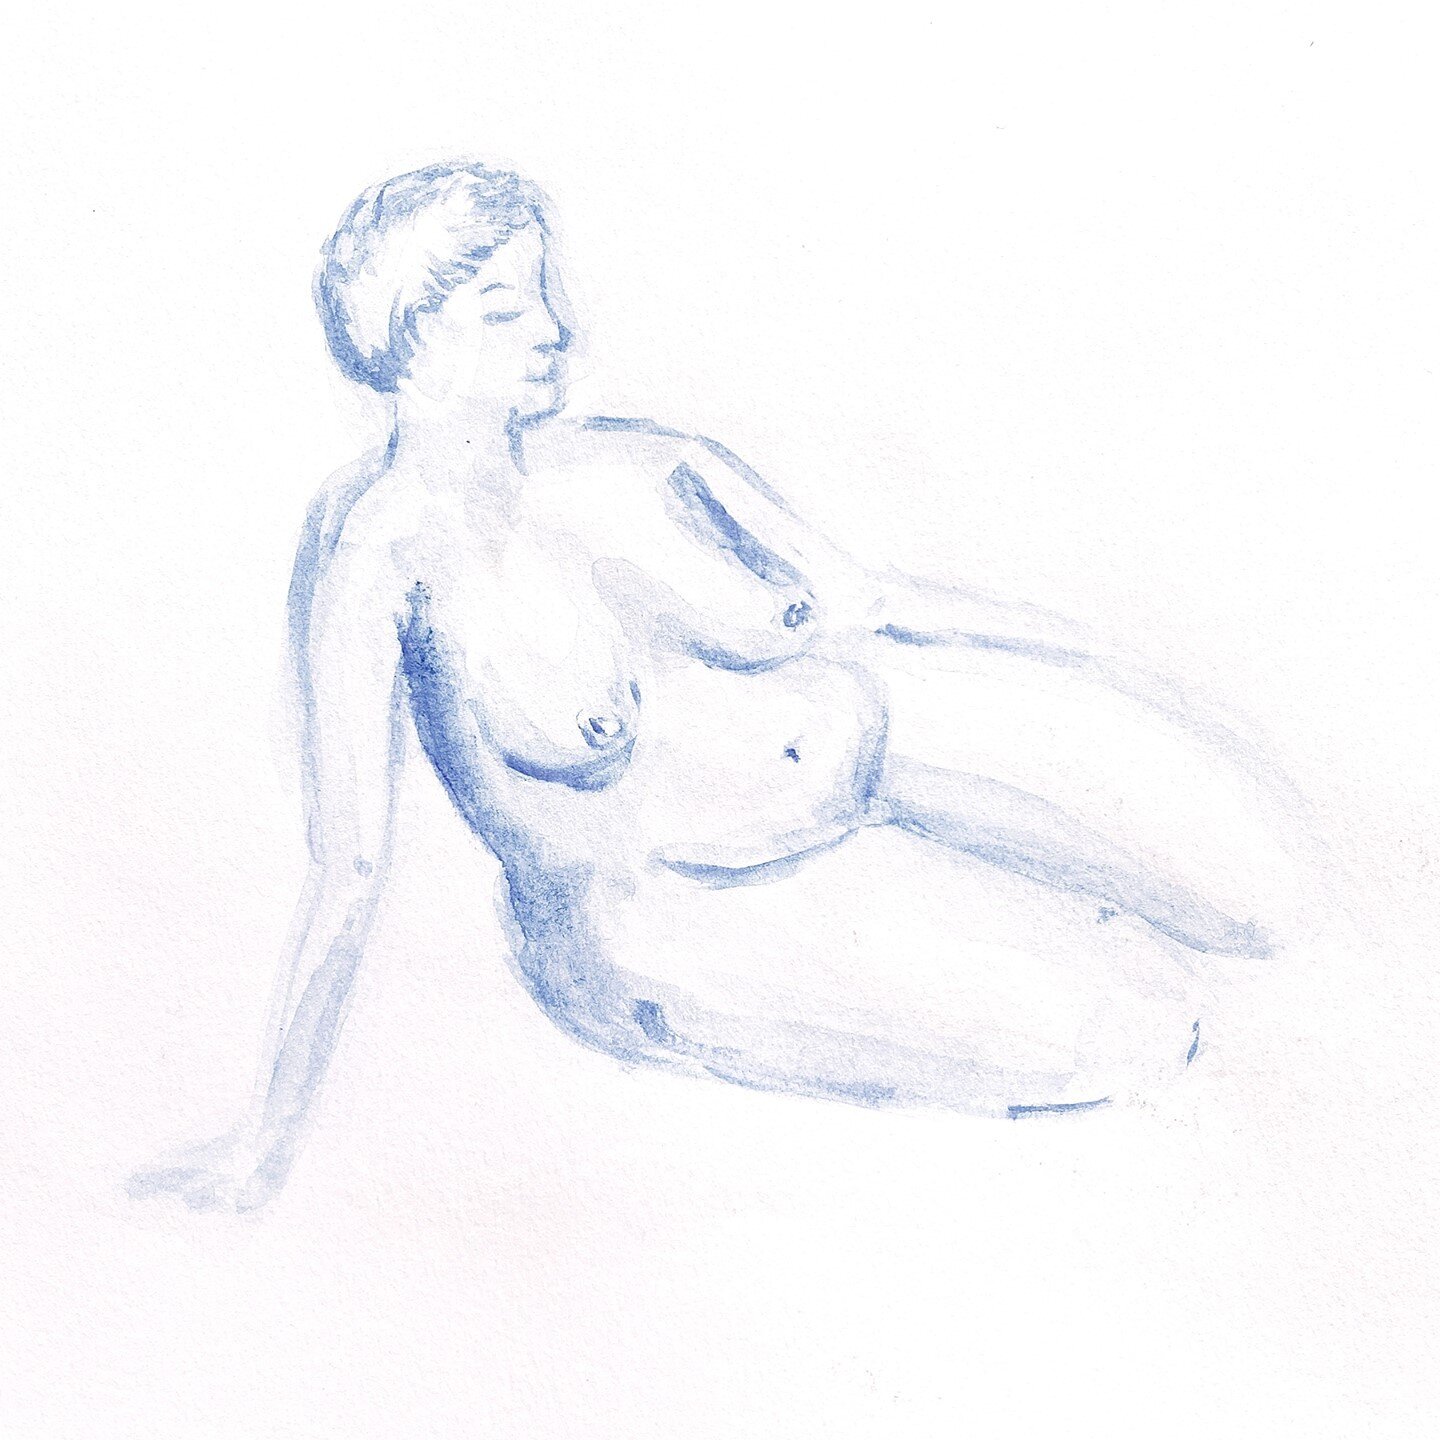 Creation is a slow dopamine activity -consuming is a fast one. Slow down with us. Draw from life. Make something that has never been made before. The rewards will be greater and enduring.⁠
⁠
#lifedrawingbyron⁠
.⁠
.⁠
.⁠
.⁠
.⁠
.⁠
.⁠
.⁠
.⁠
.⁠
.#lifedraw